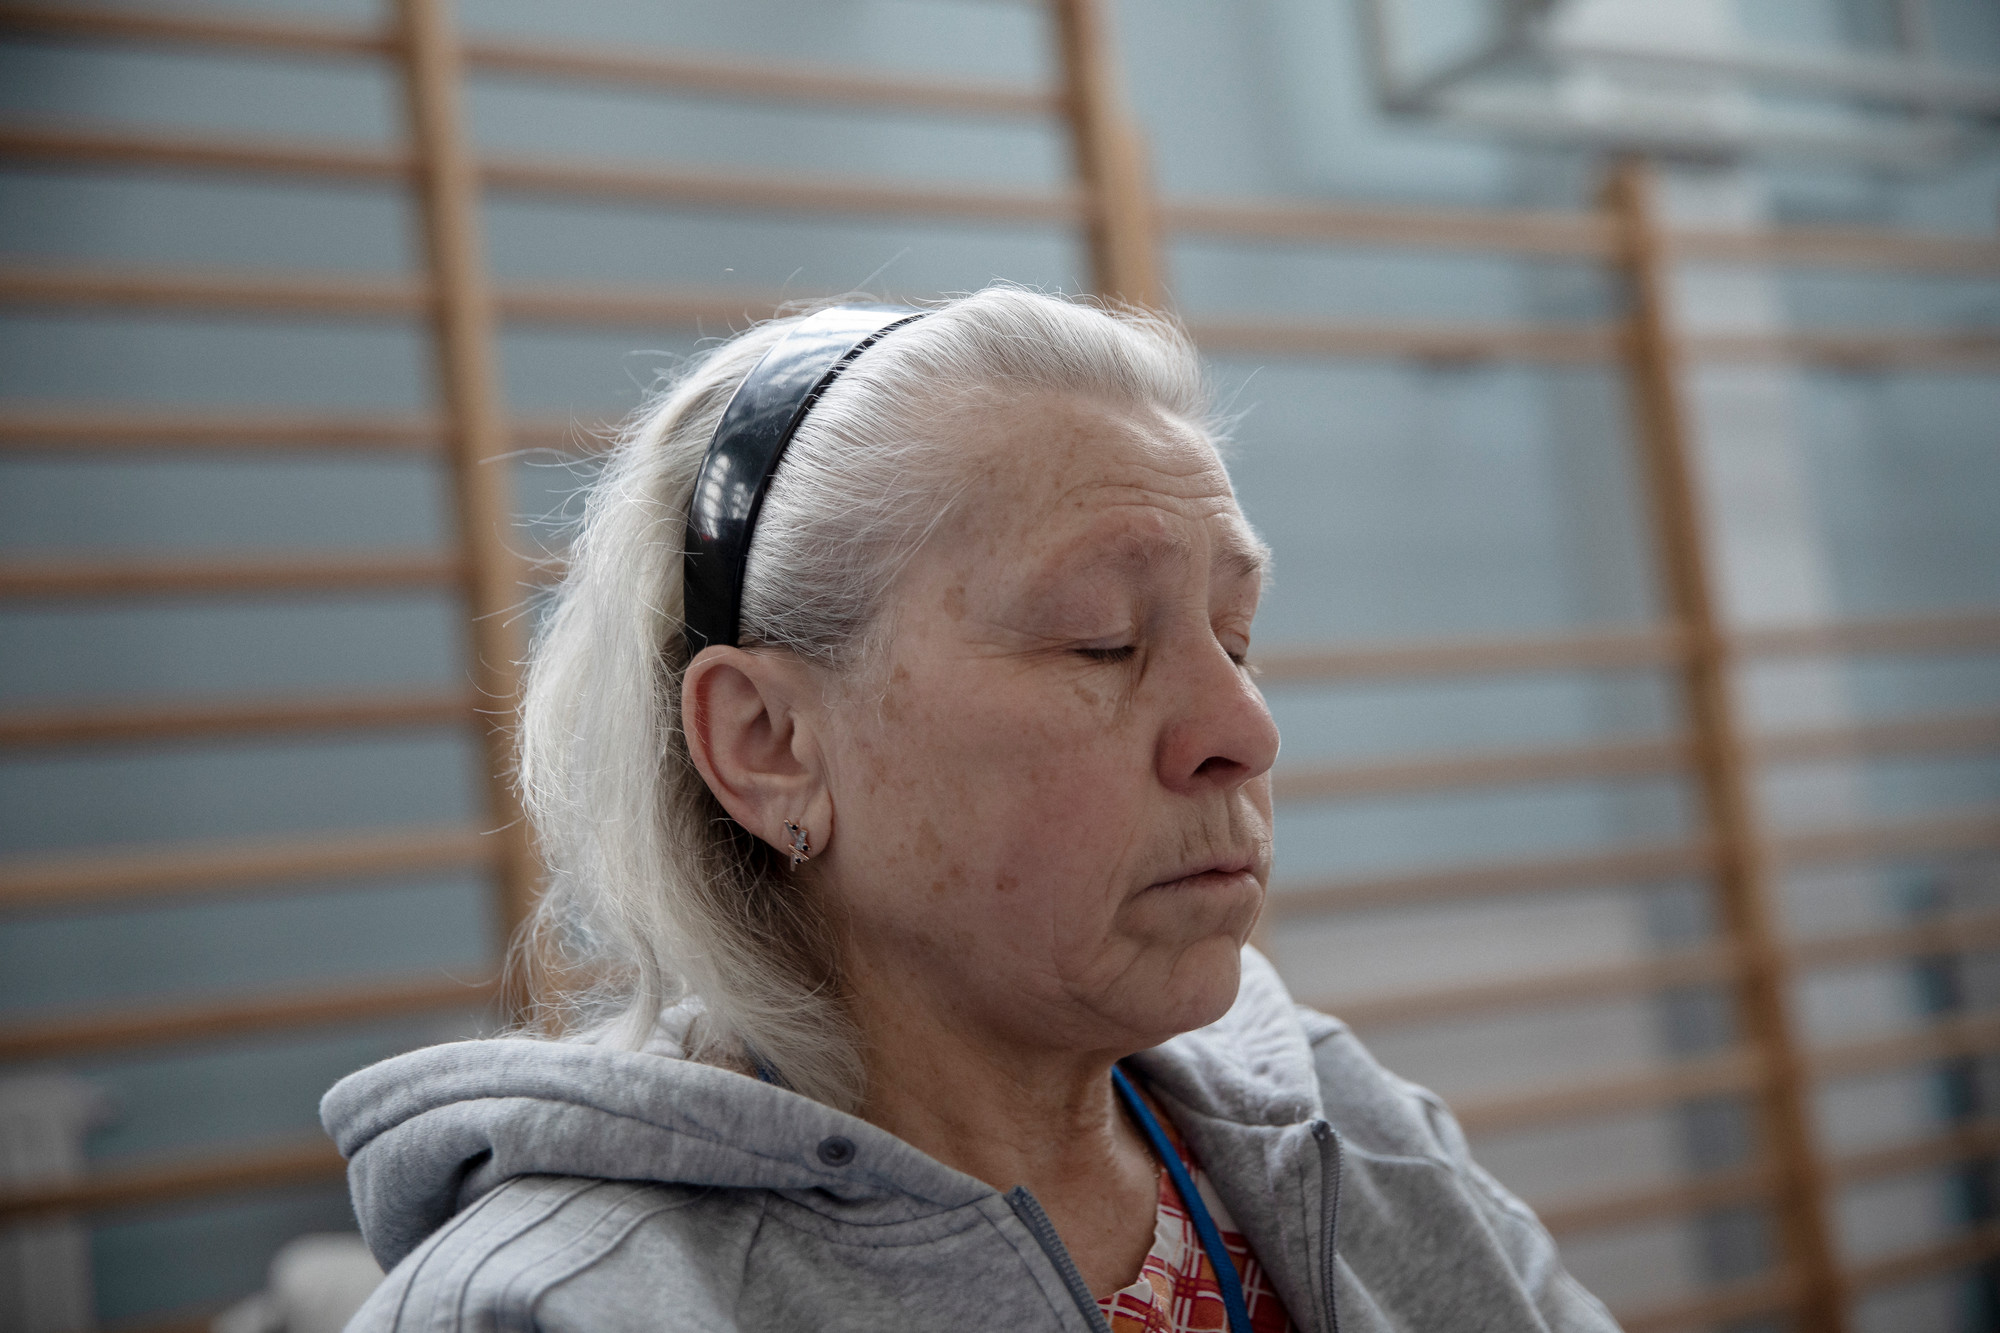 Tatiana Ganchou was displaced a first time during the Tchernobyl catastrophe, when she was a young girl living in Pripyat. "I can't sleep, I have panic inside. I am frightened that everything will happen again like in Tchernobyl, I have the same feeling I had then," she said. Adrienne Surprenant /MYOP